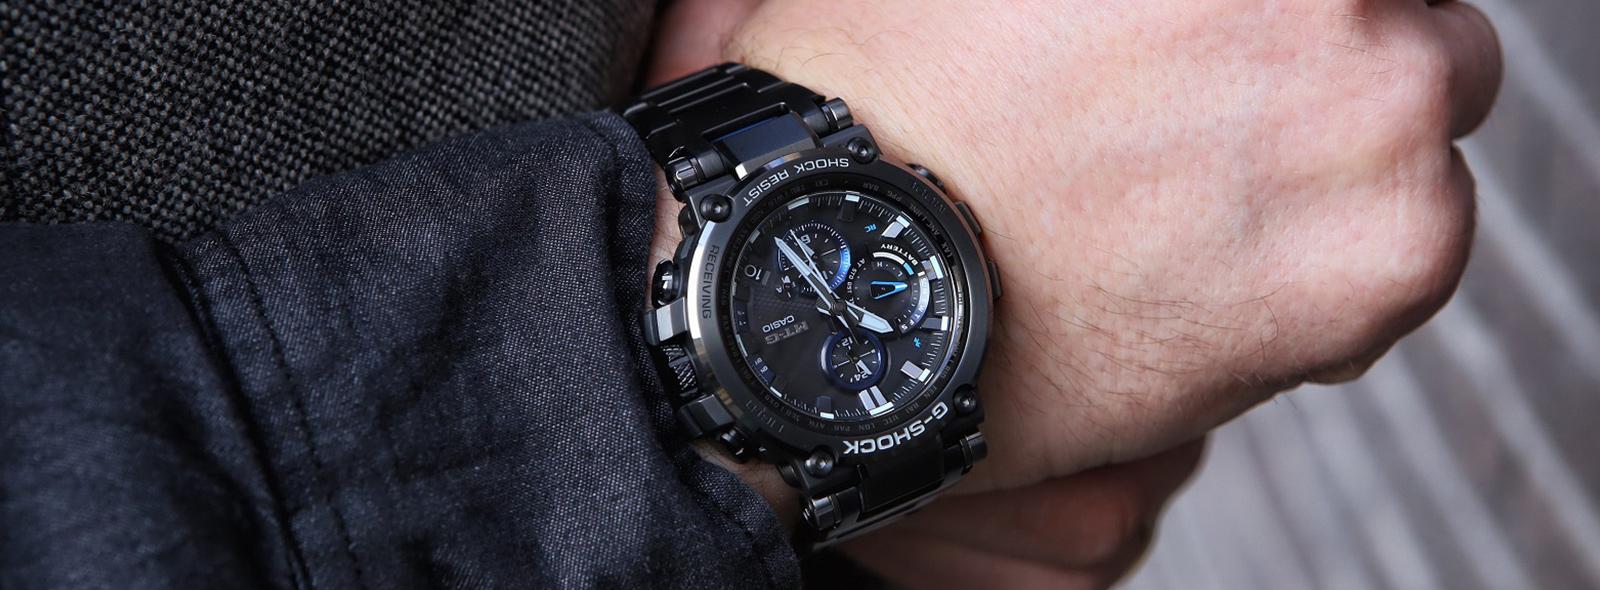 How to set up a Casio G-SHOCK watch?